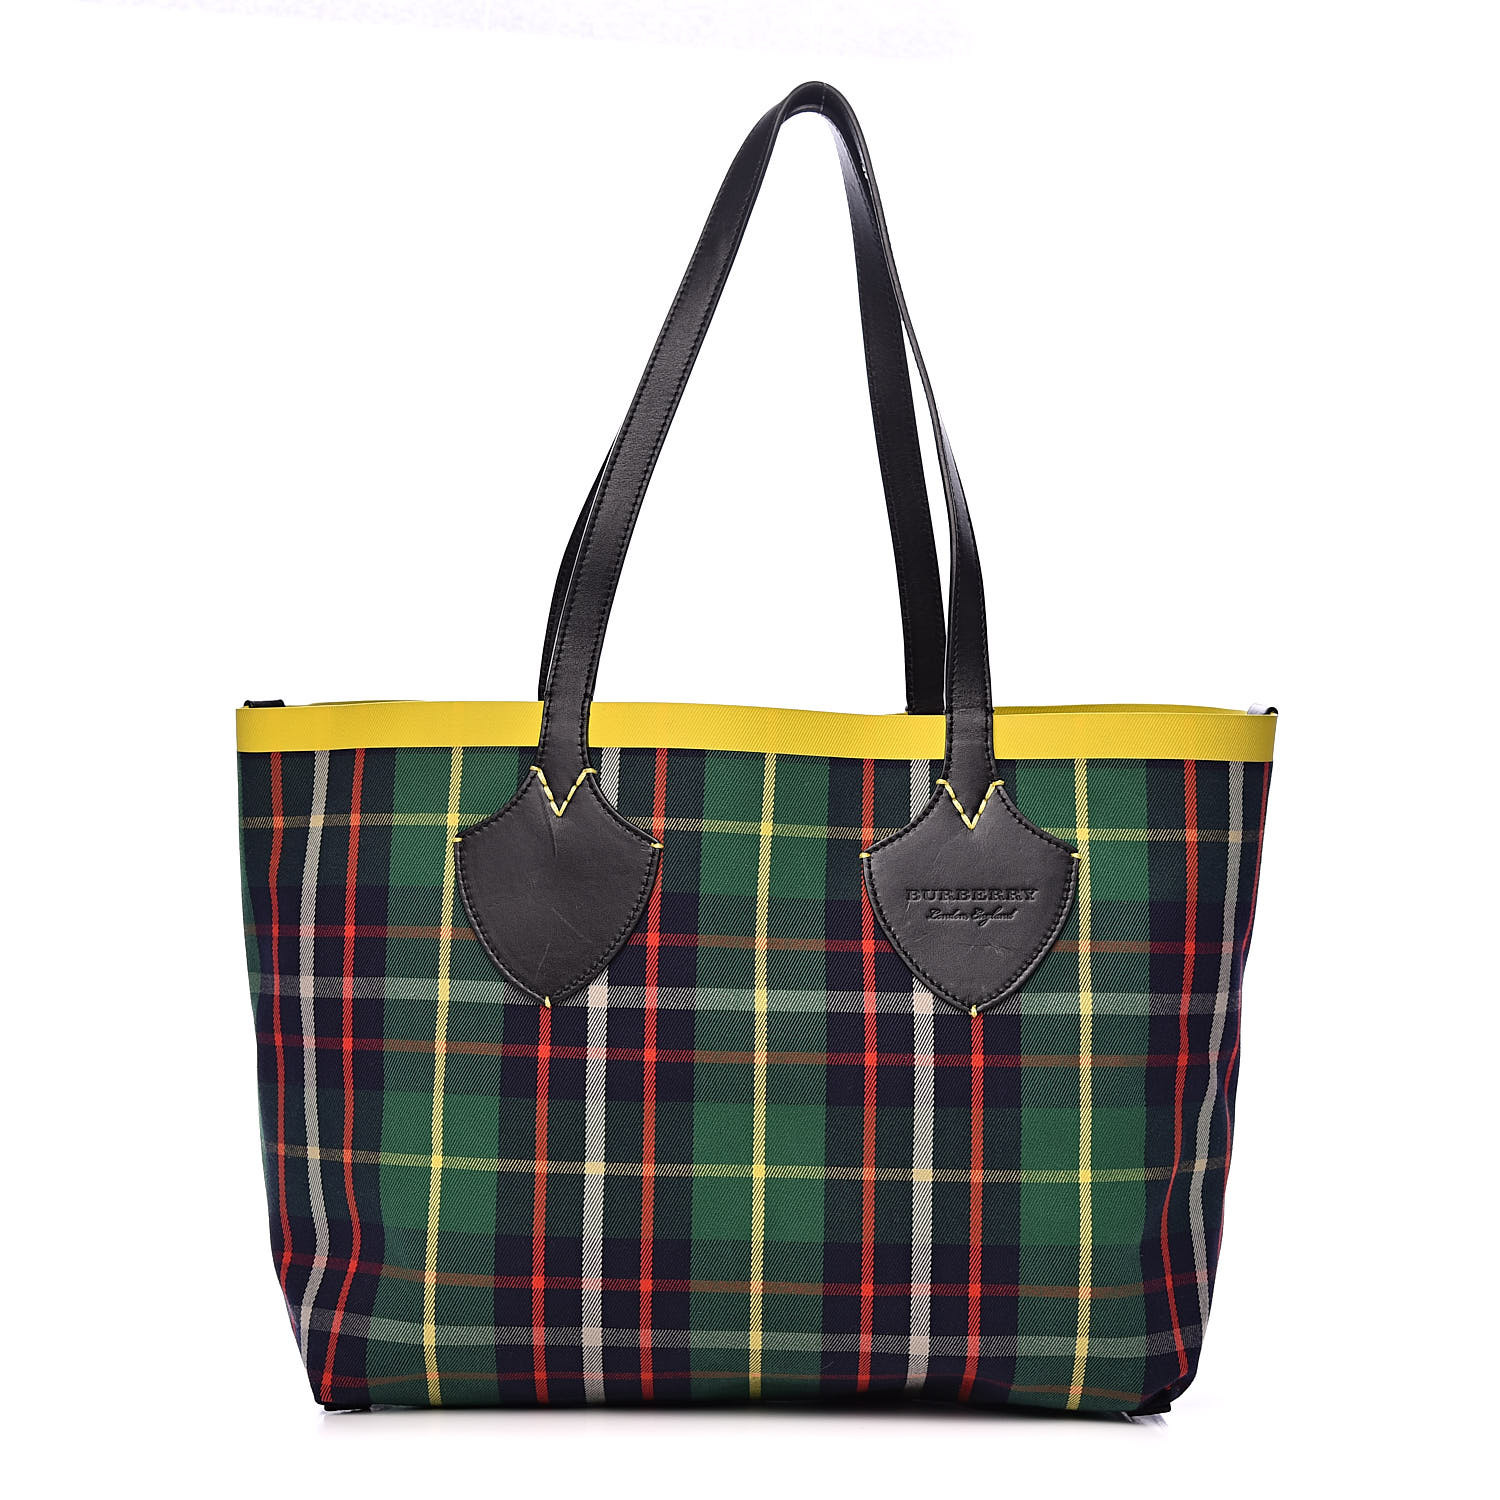 giant burberry tote